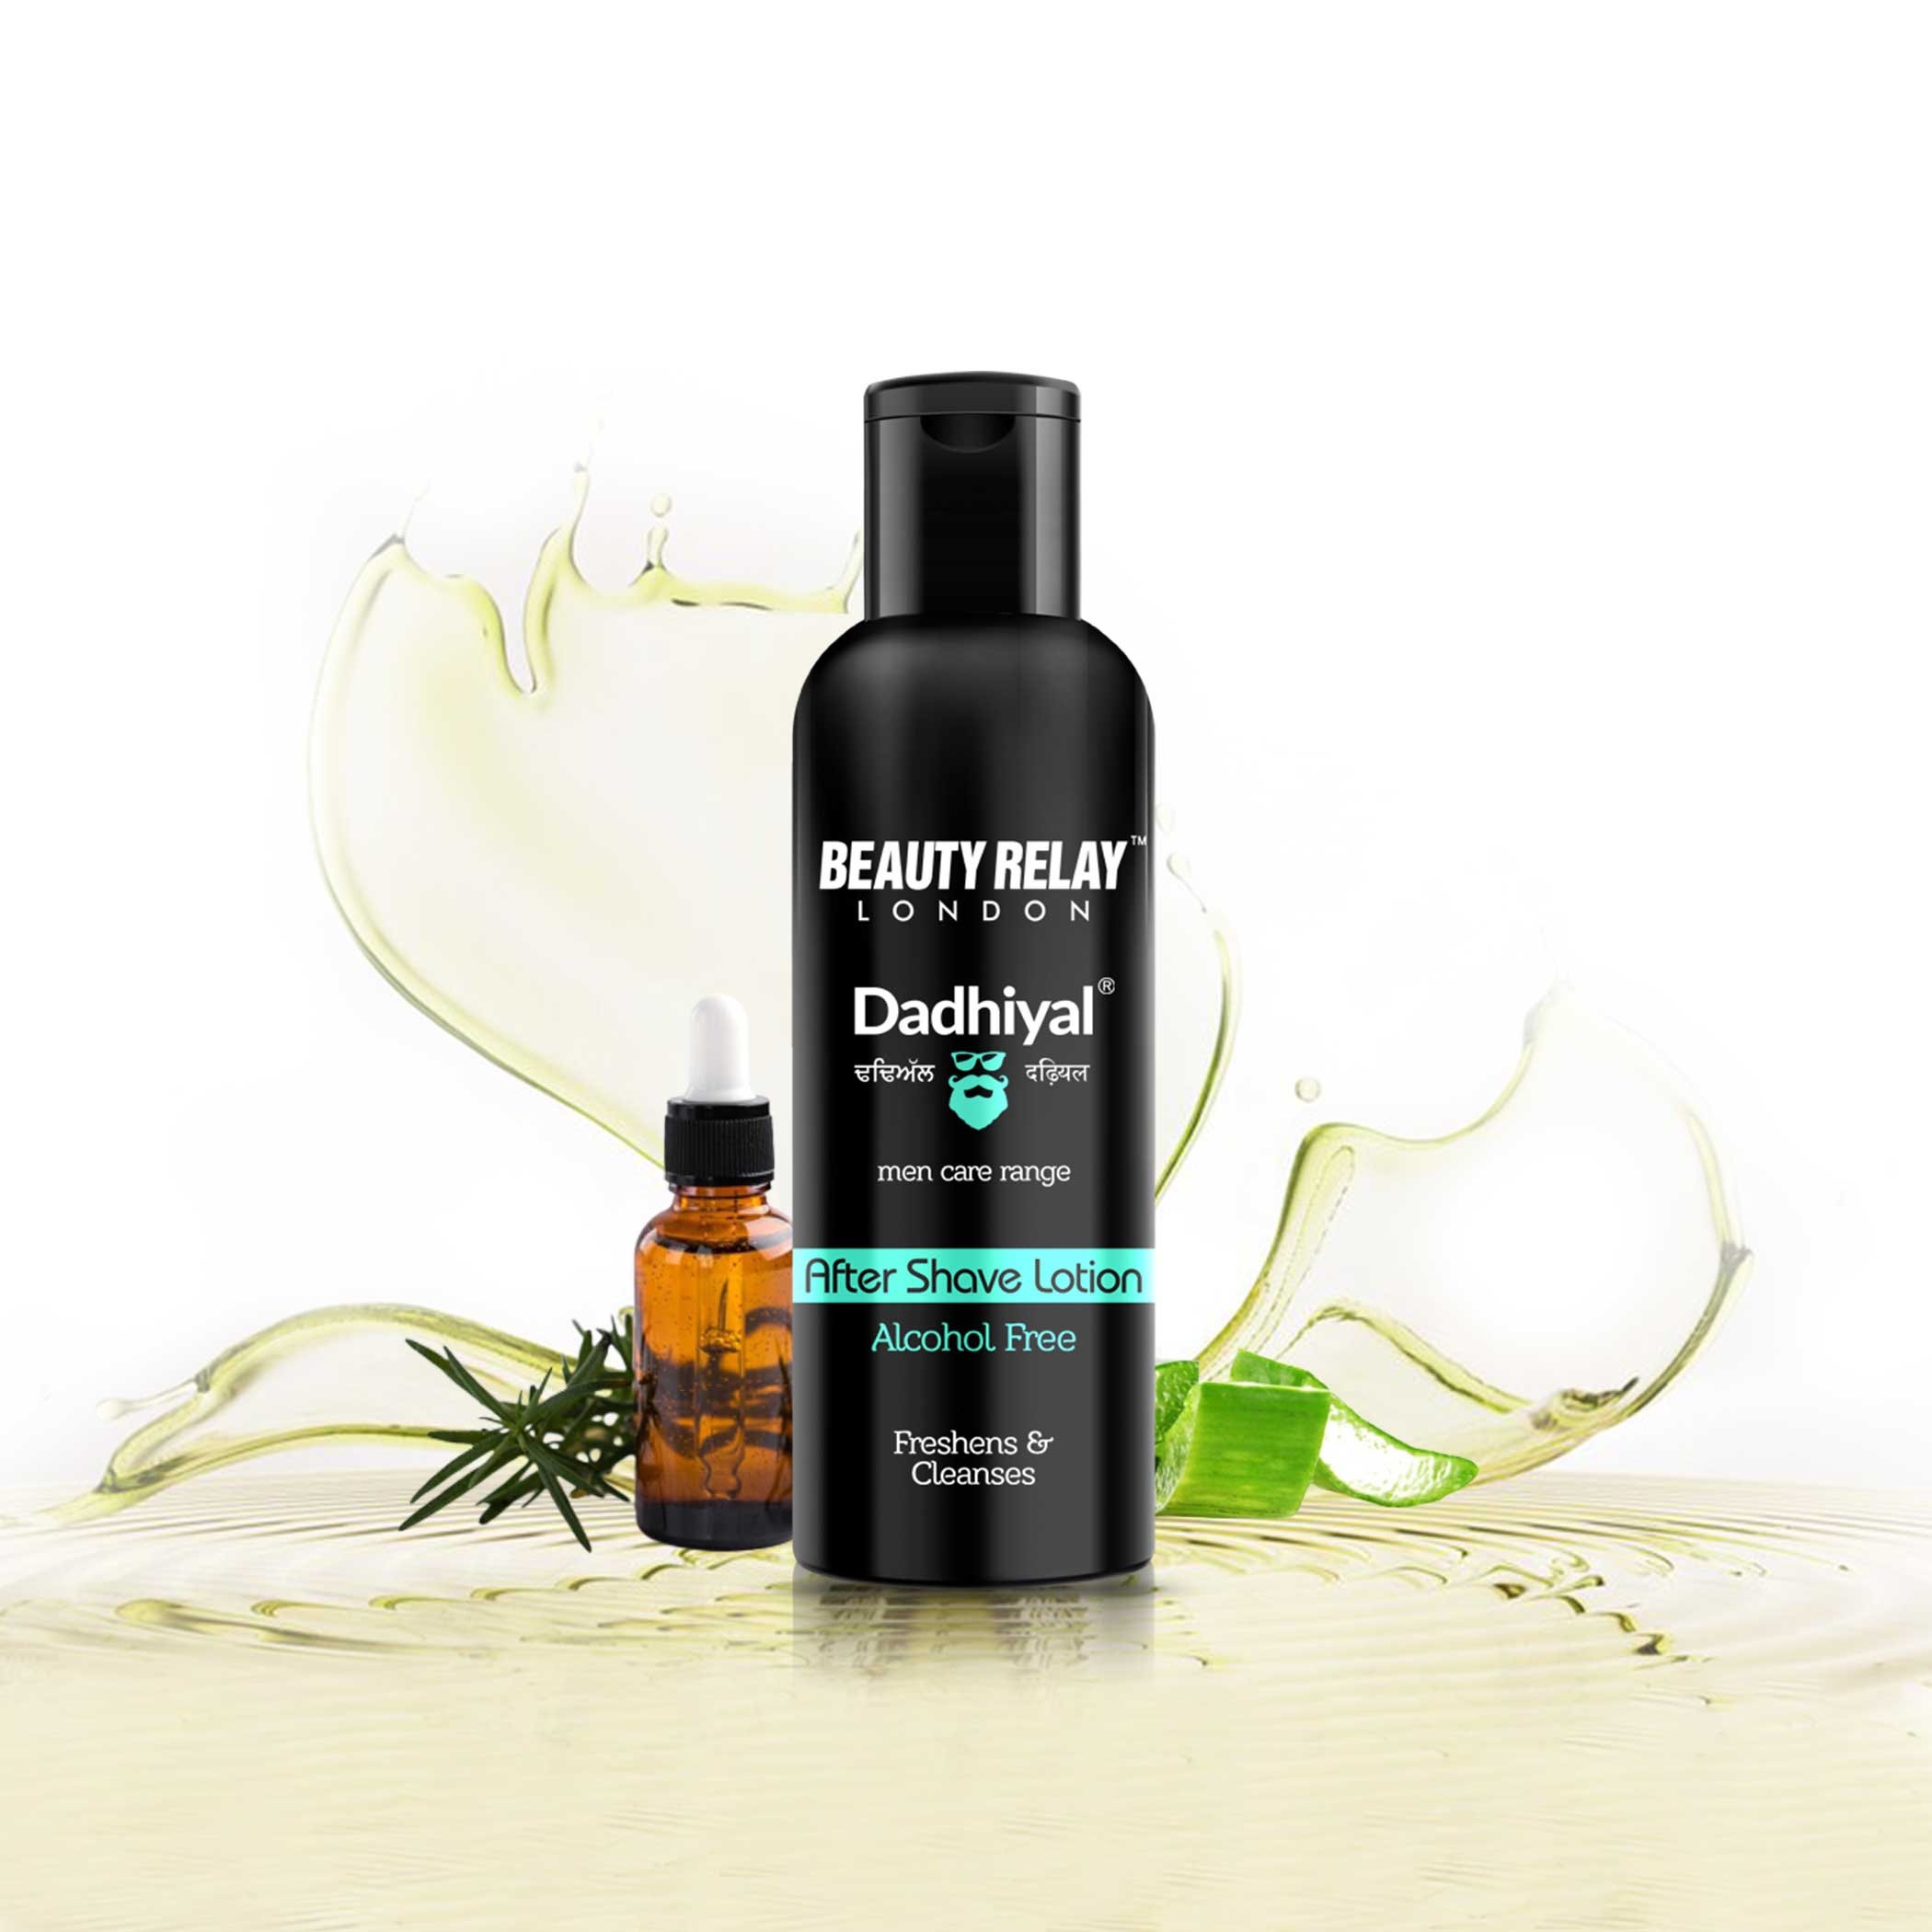 After Shave Lotion with Rosemary - Beauty Relay India